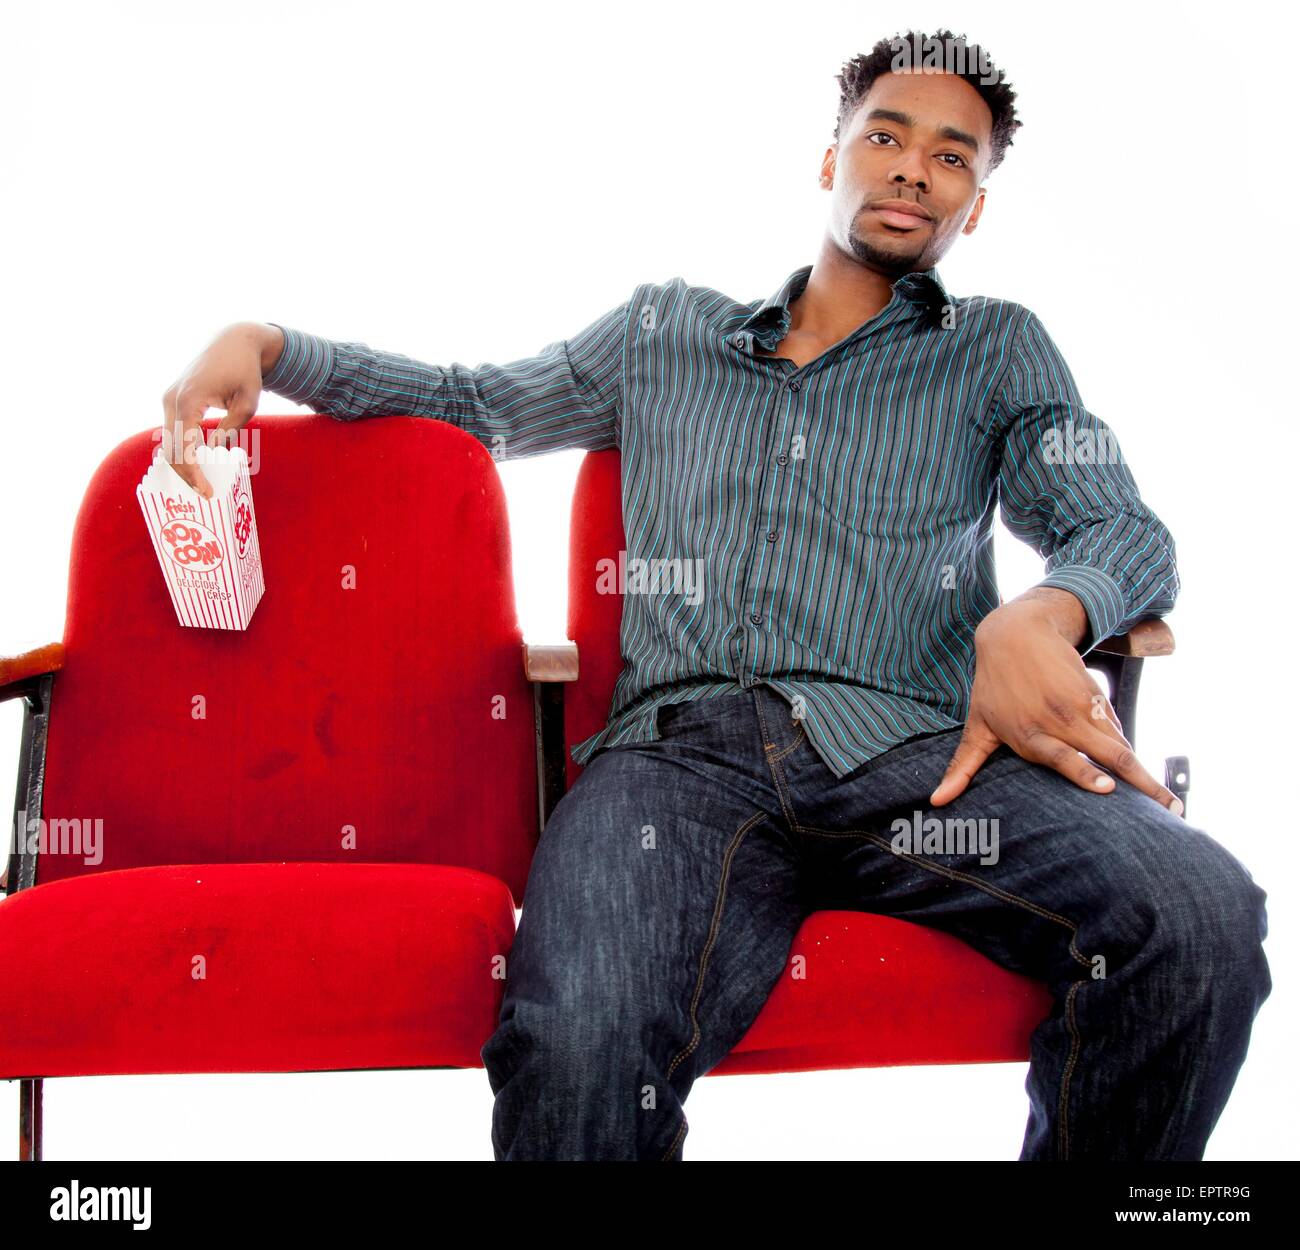 Attractive afro-american man posing in a  studio isolated on a background Stock Photo